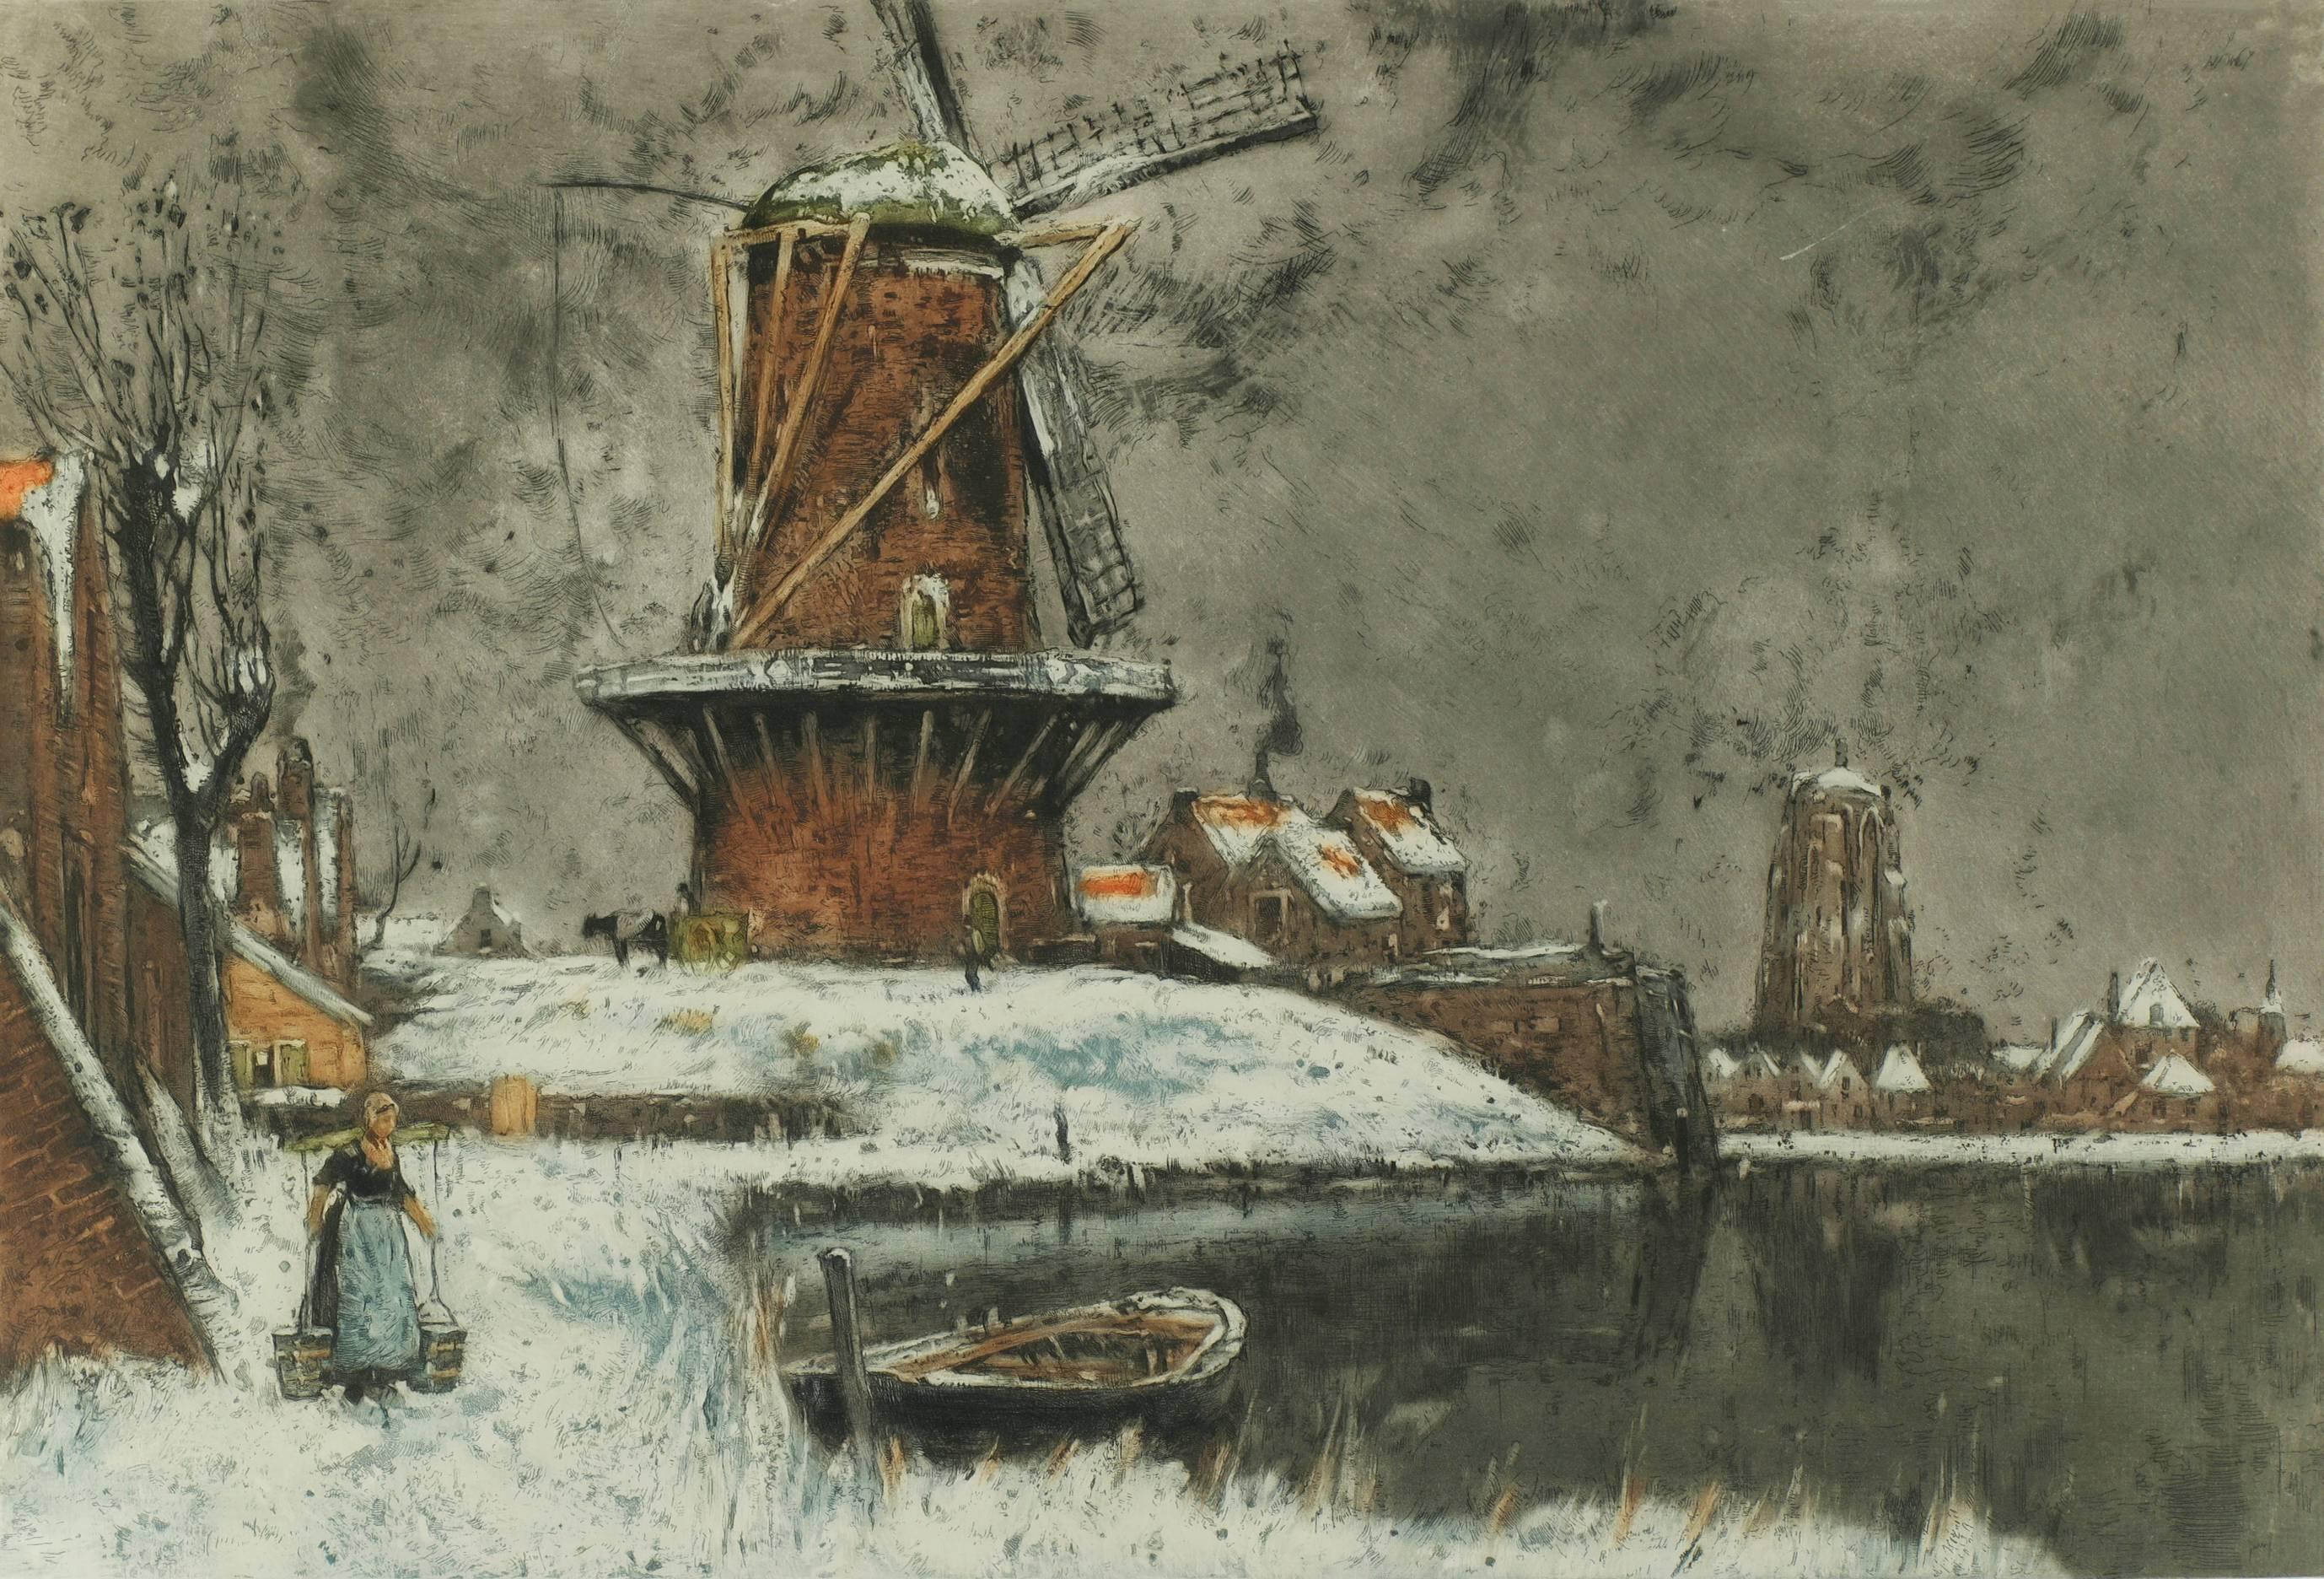 Windmill in Winter - Print by Jeanley Charlet